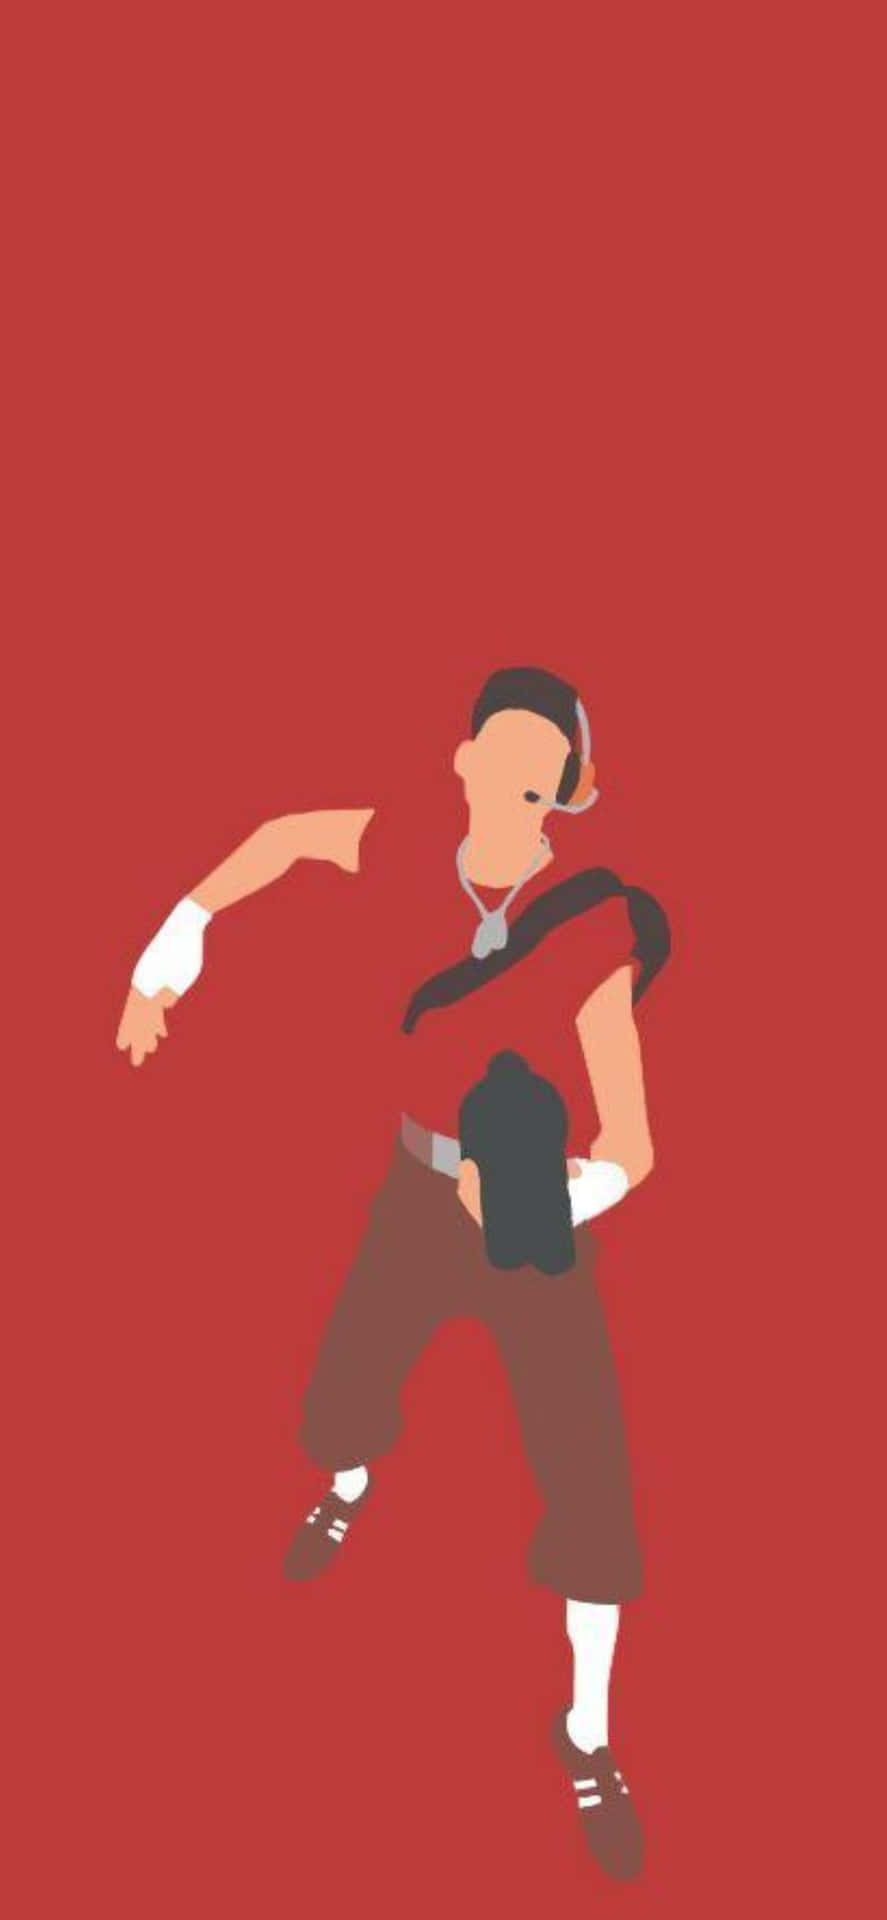 Download Iphone Xs Tf2 Background Red Poster Scout Taunting ...